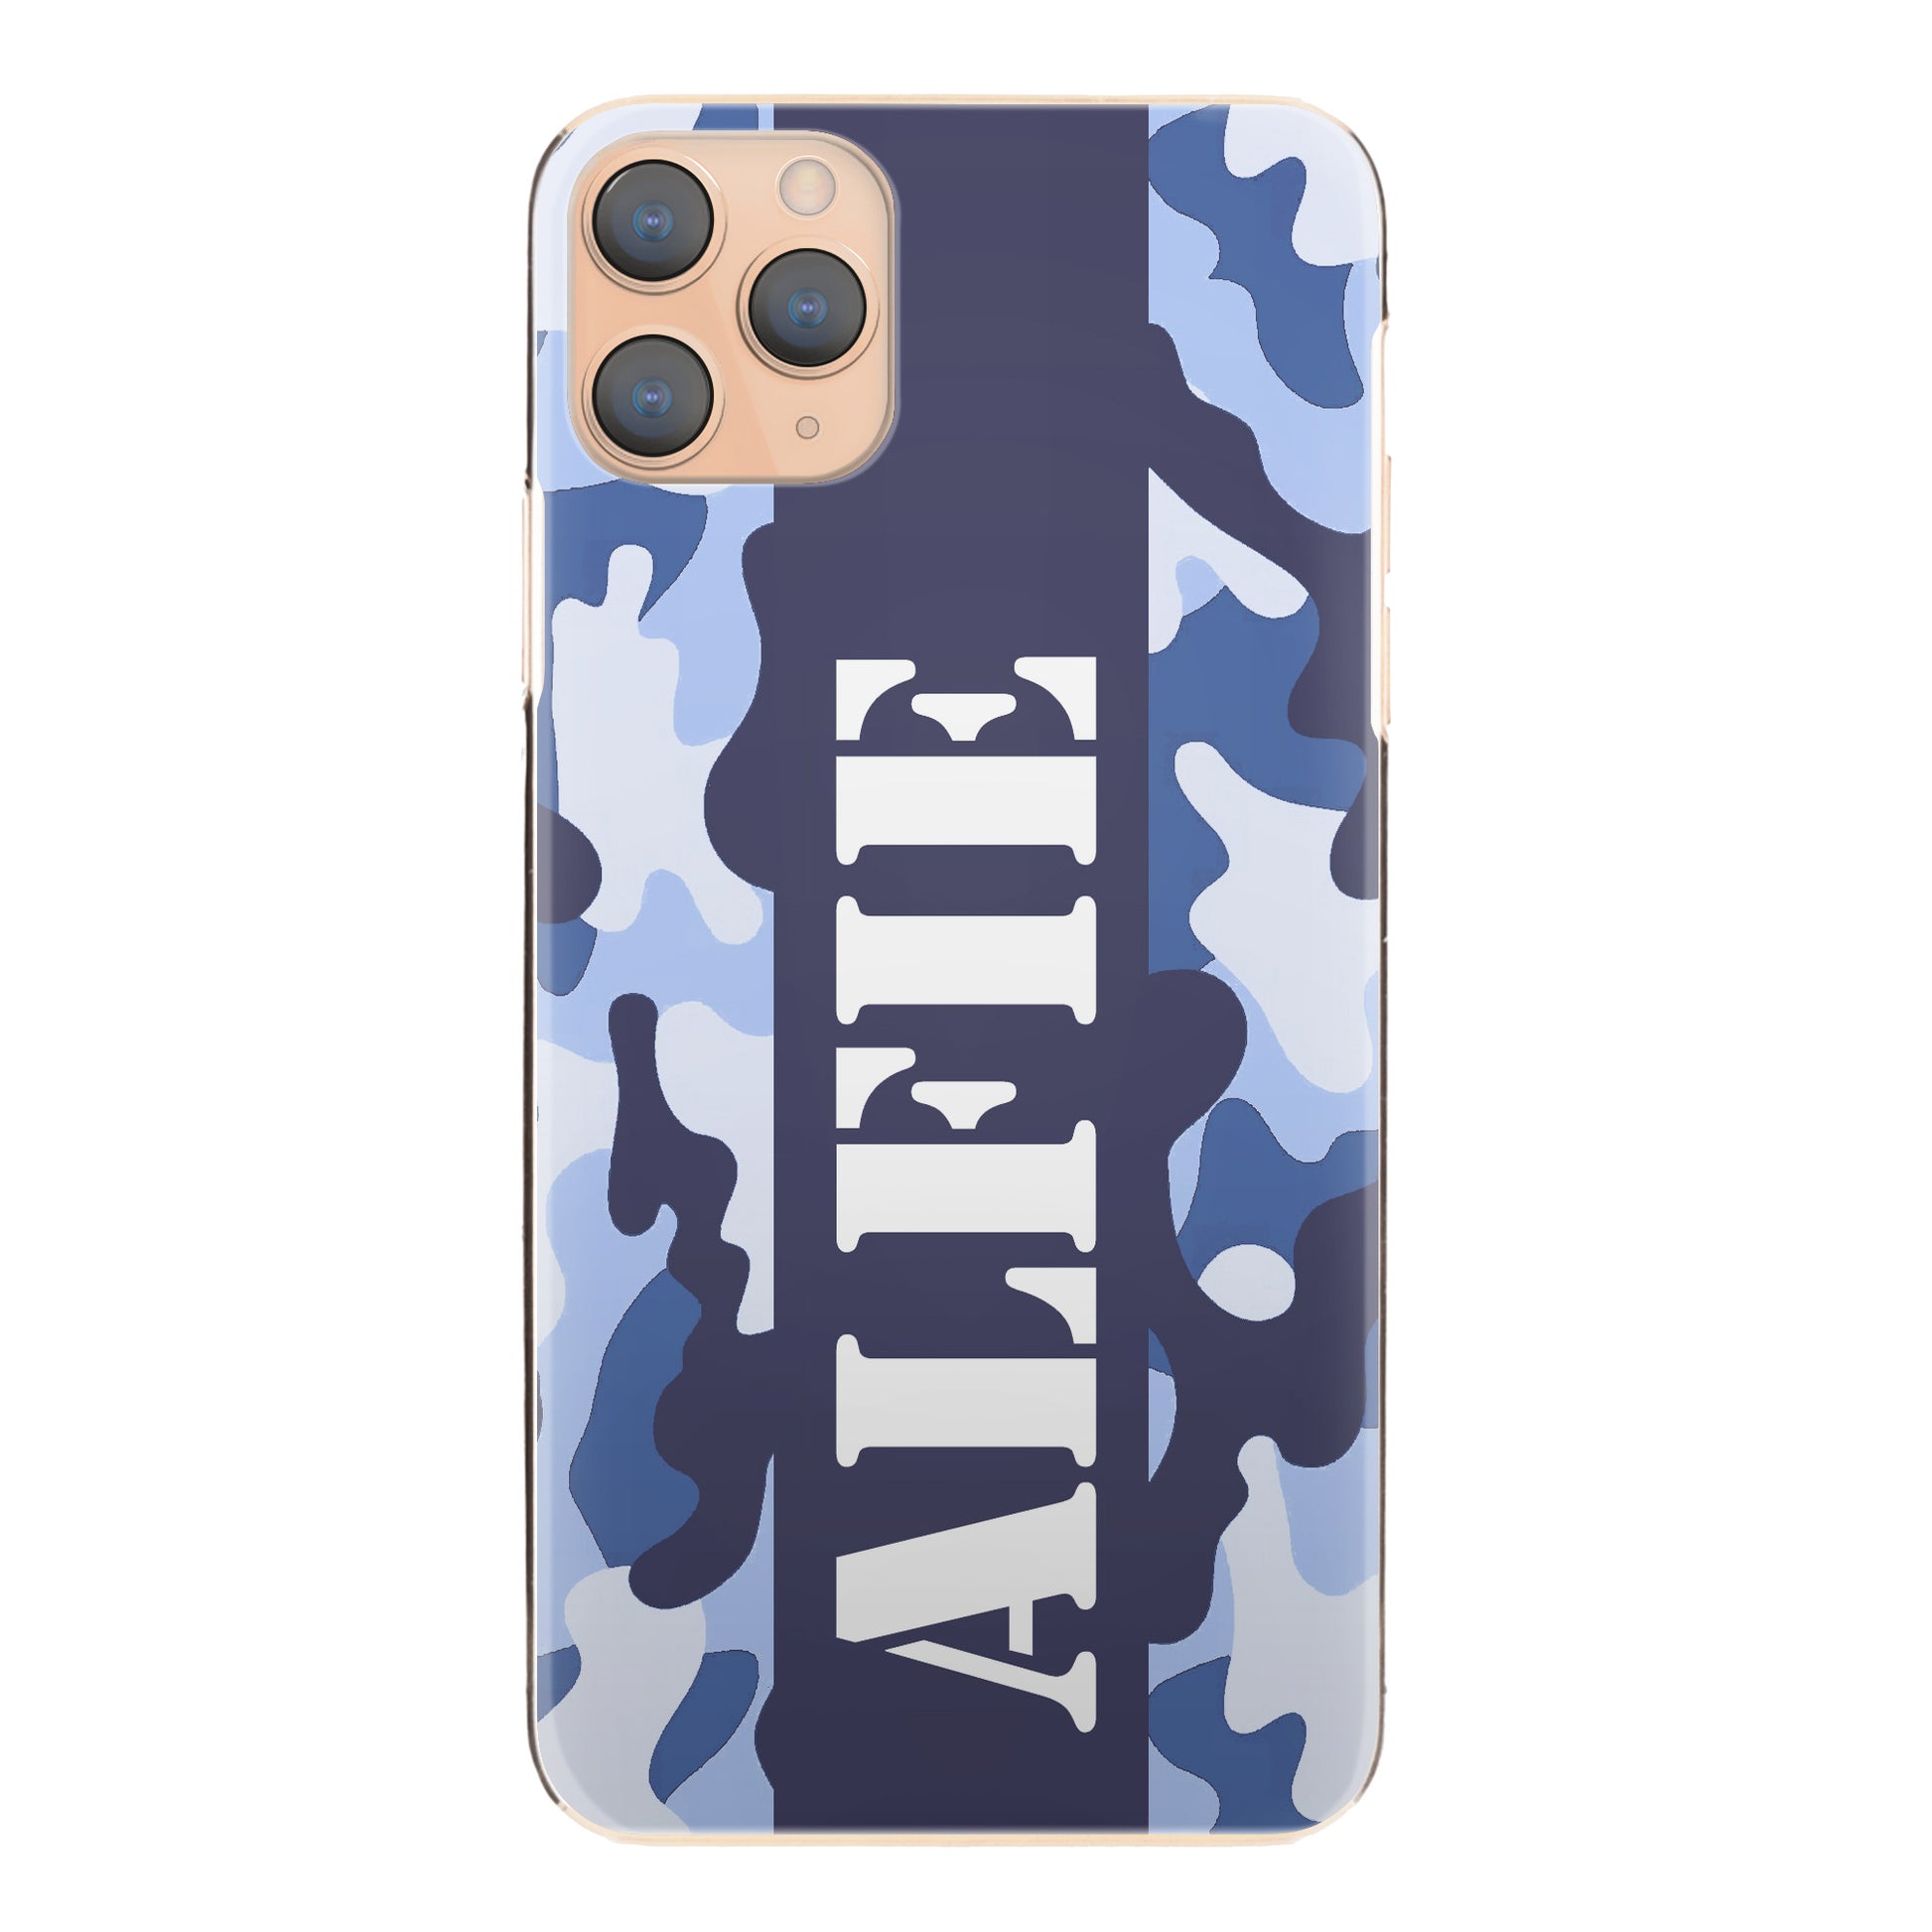 Personalised Motorola Phone Hard Case with Military Text on Blue Camo